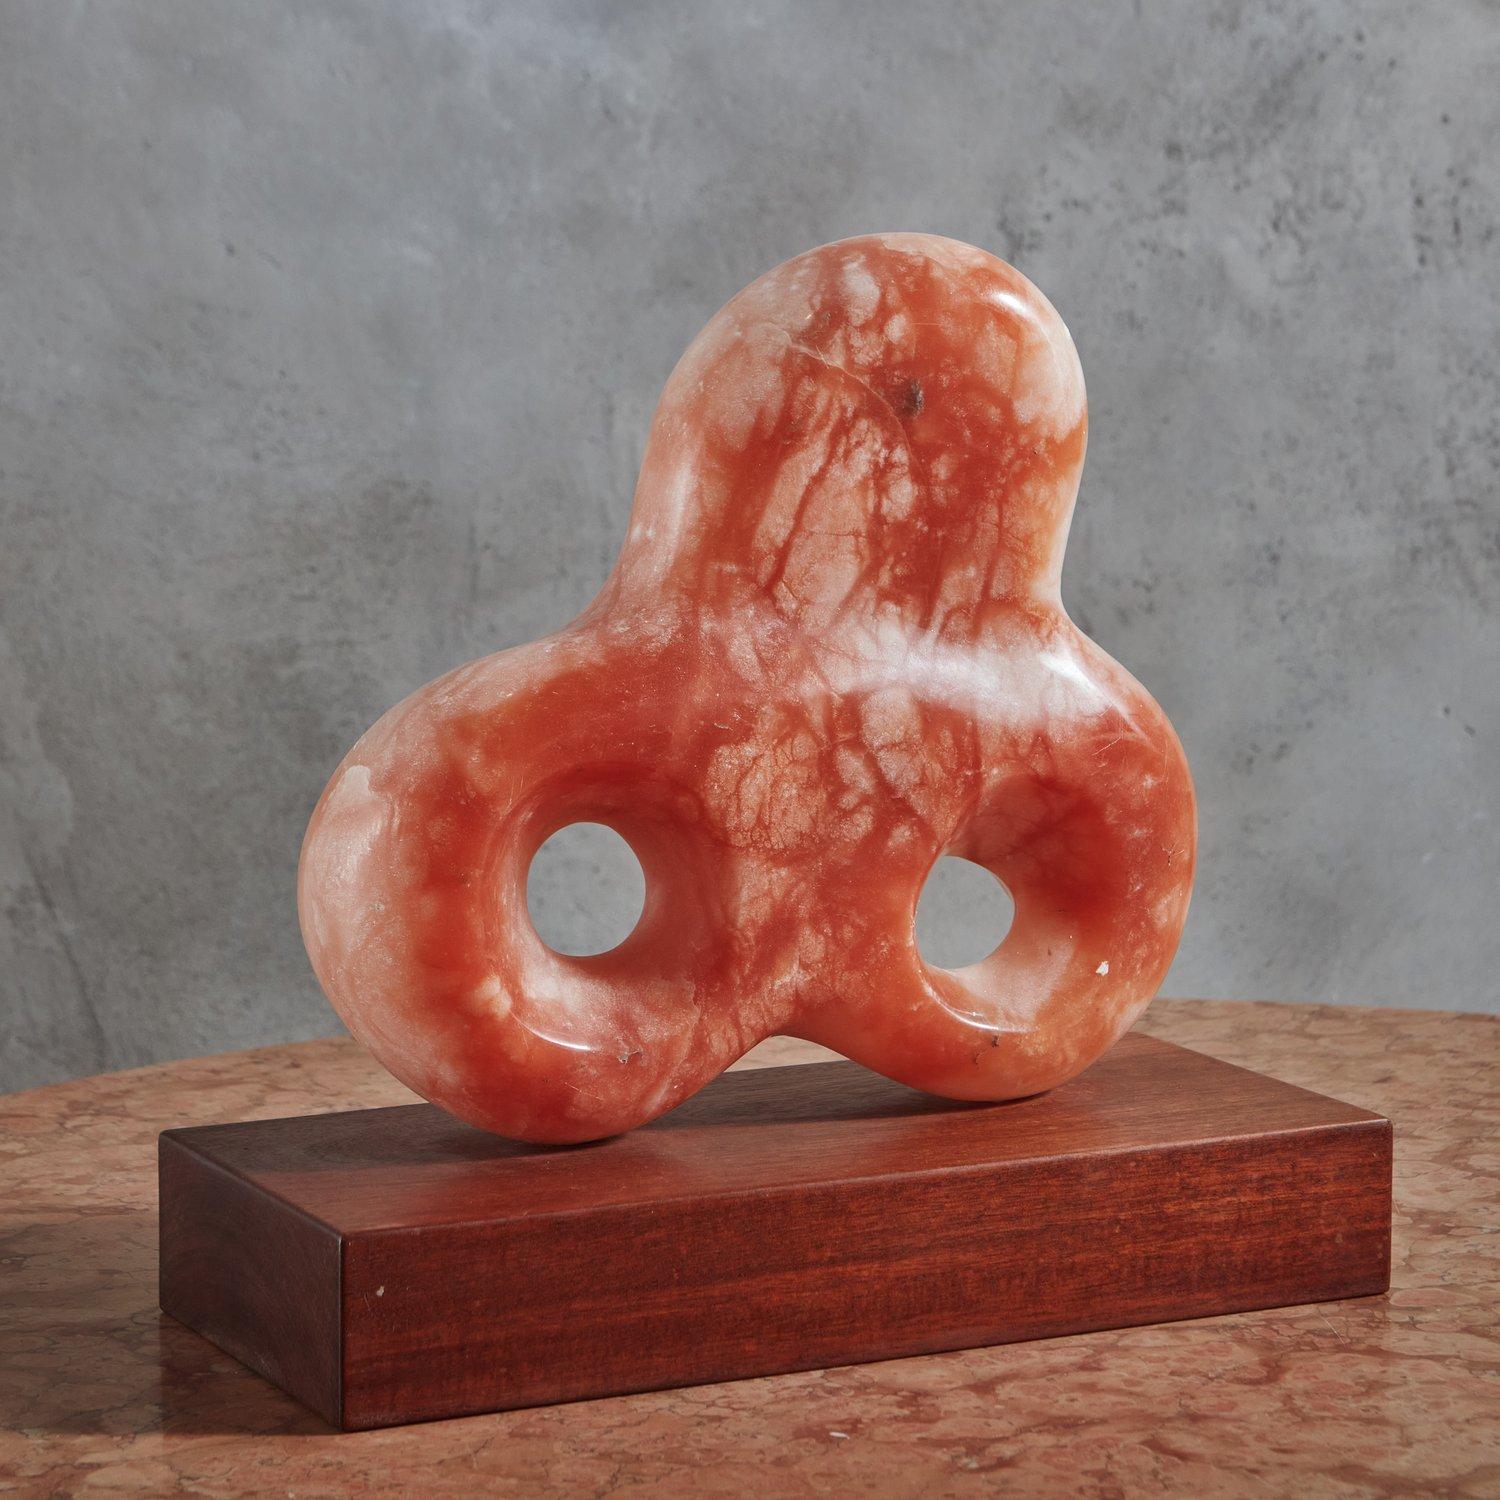 A vintage sculpture carved from a gorgeous pink alabaster stone with a range of coral, pink and salmon hues. This abstract piece features elegant curves and circular cutout details. It is presented on a rectangular wood base. Unsigned. 20th